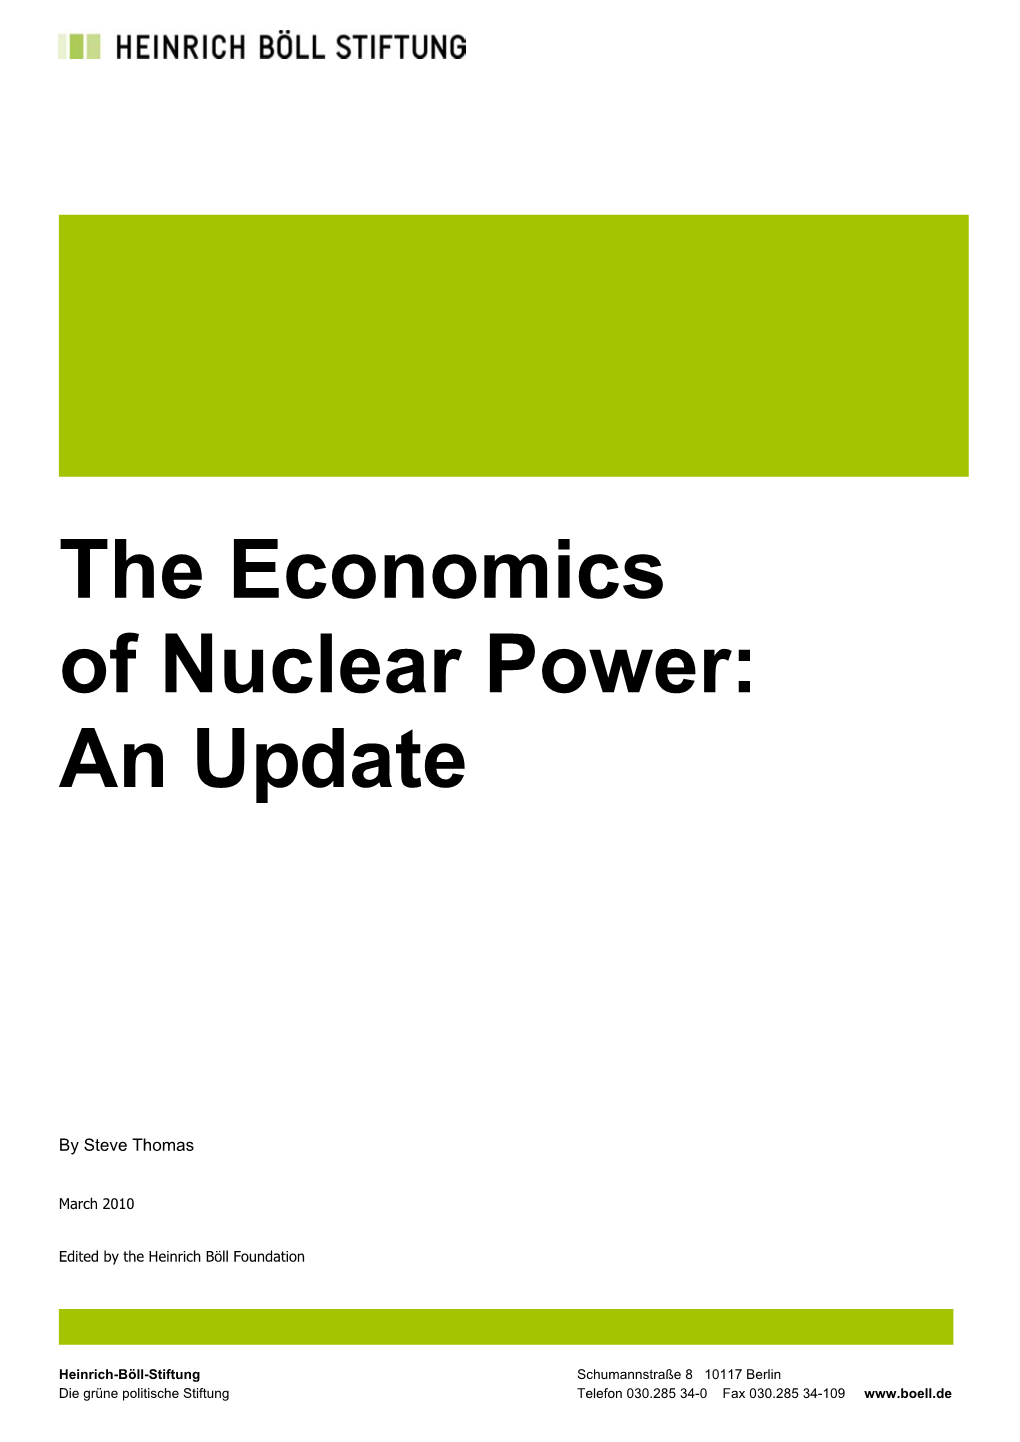 The Economics of Nuclear Power: an Update